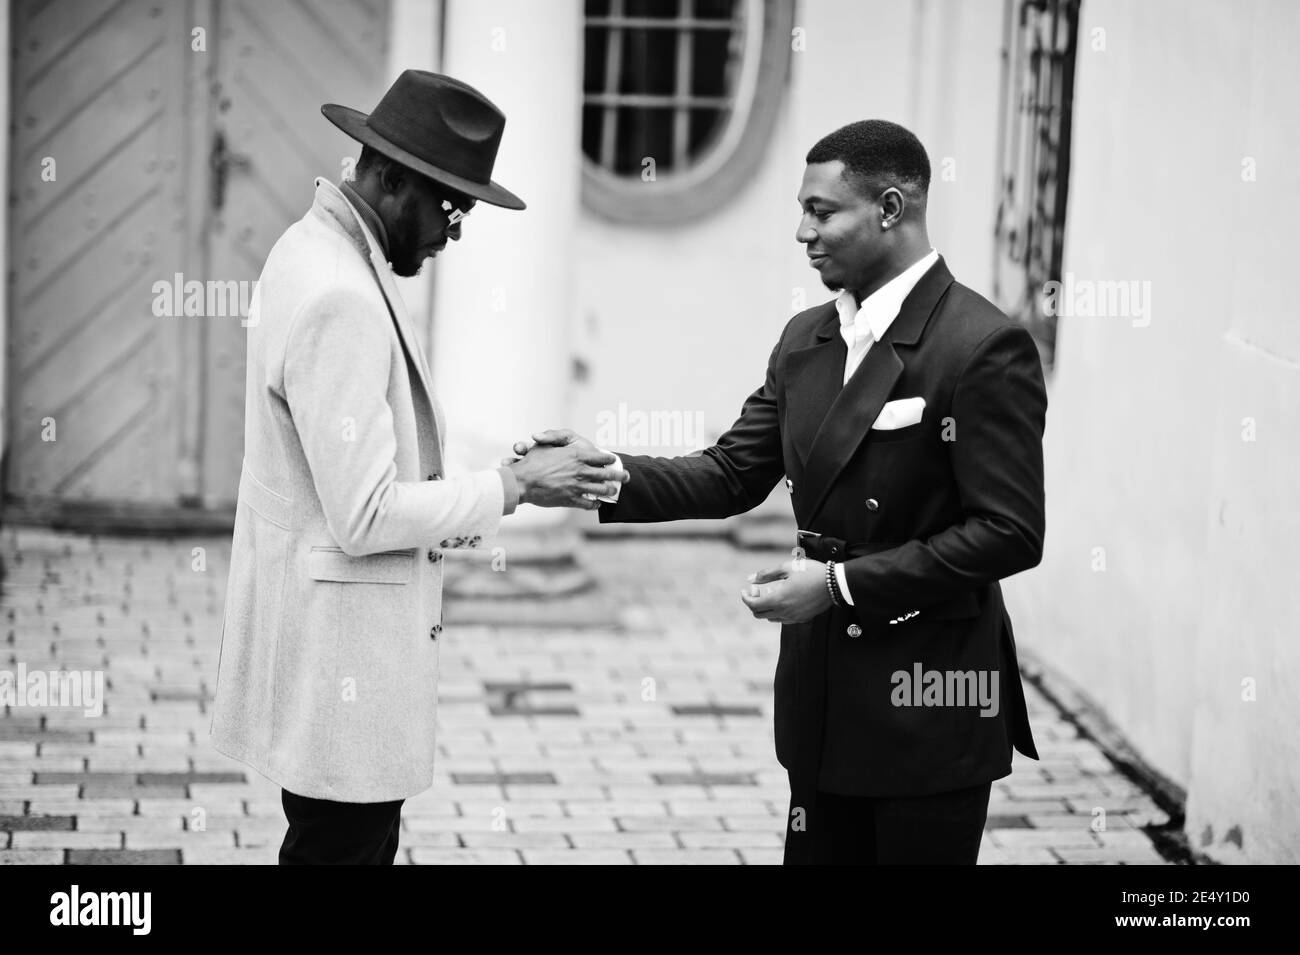 Two fashion black men shake hands each other. Fashionable portrait of african american male models. Wear suit, coat and hat. Stock Photo